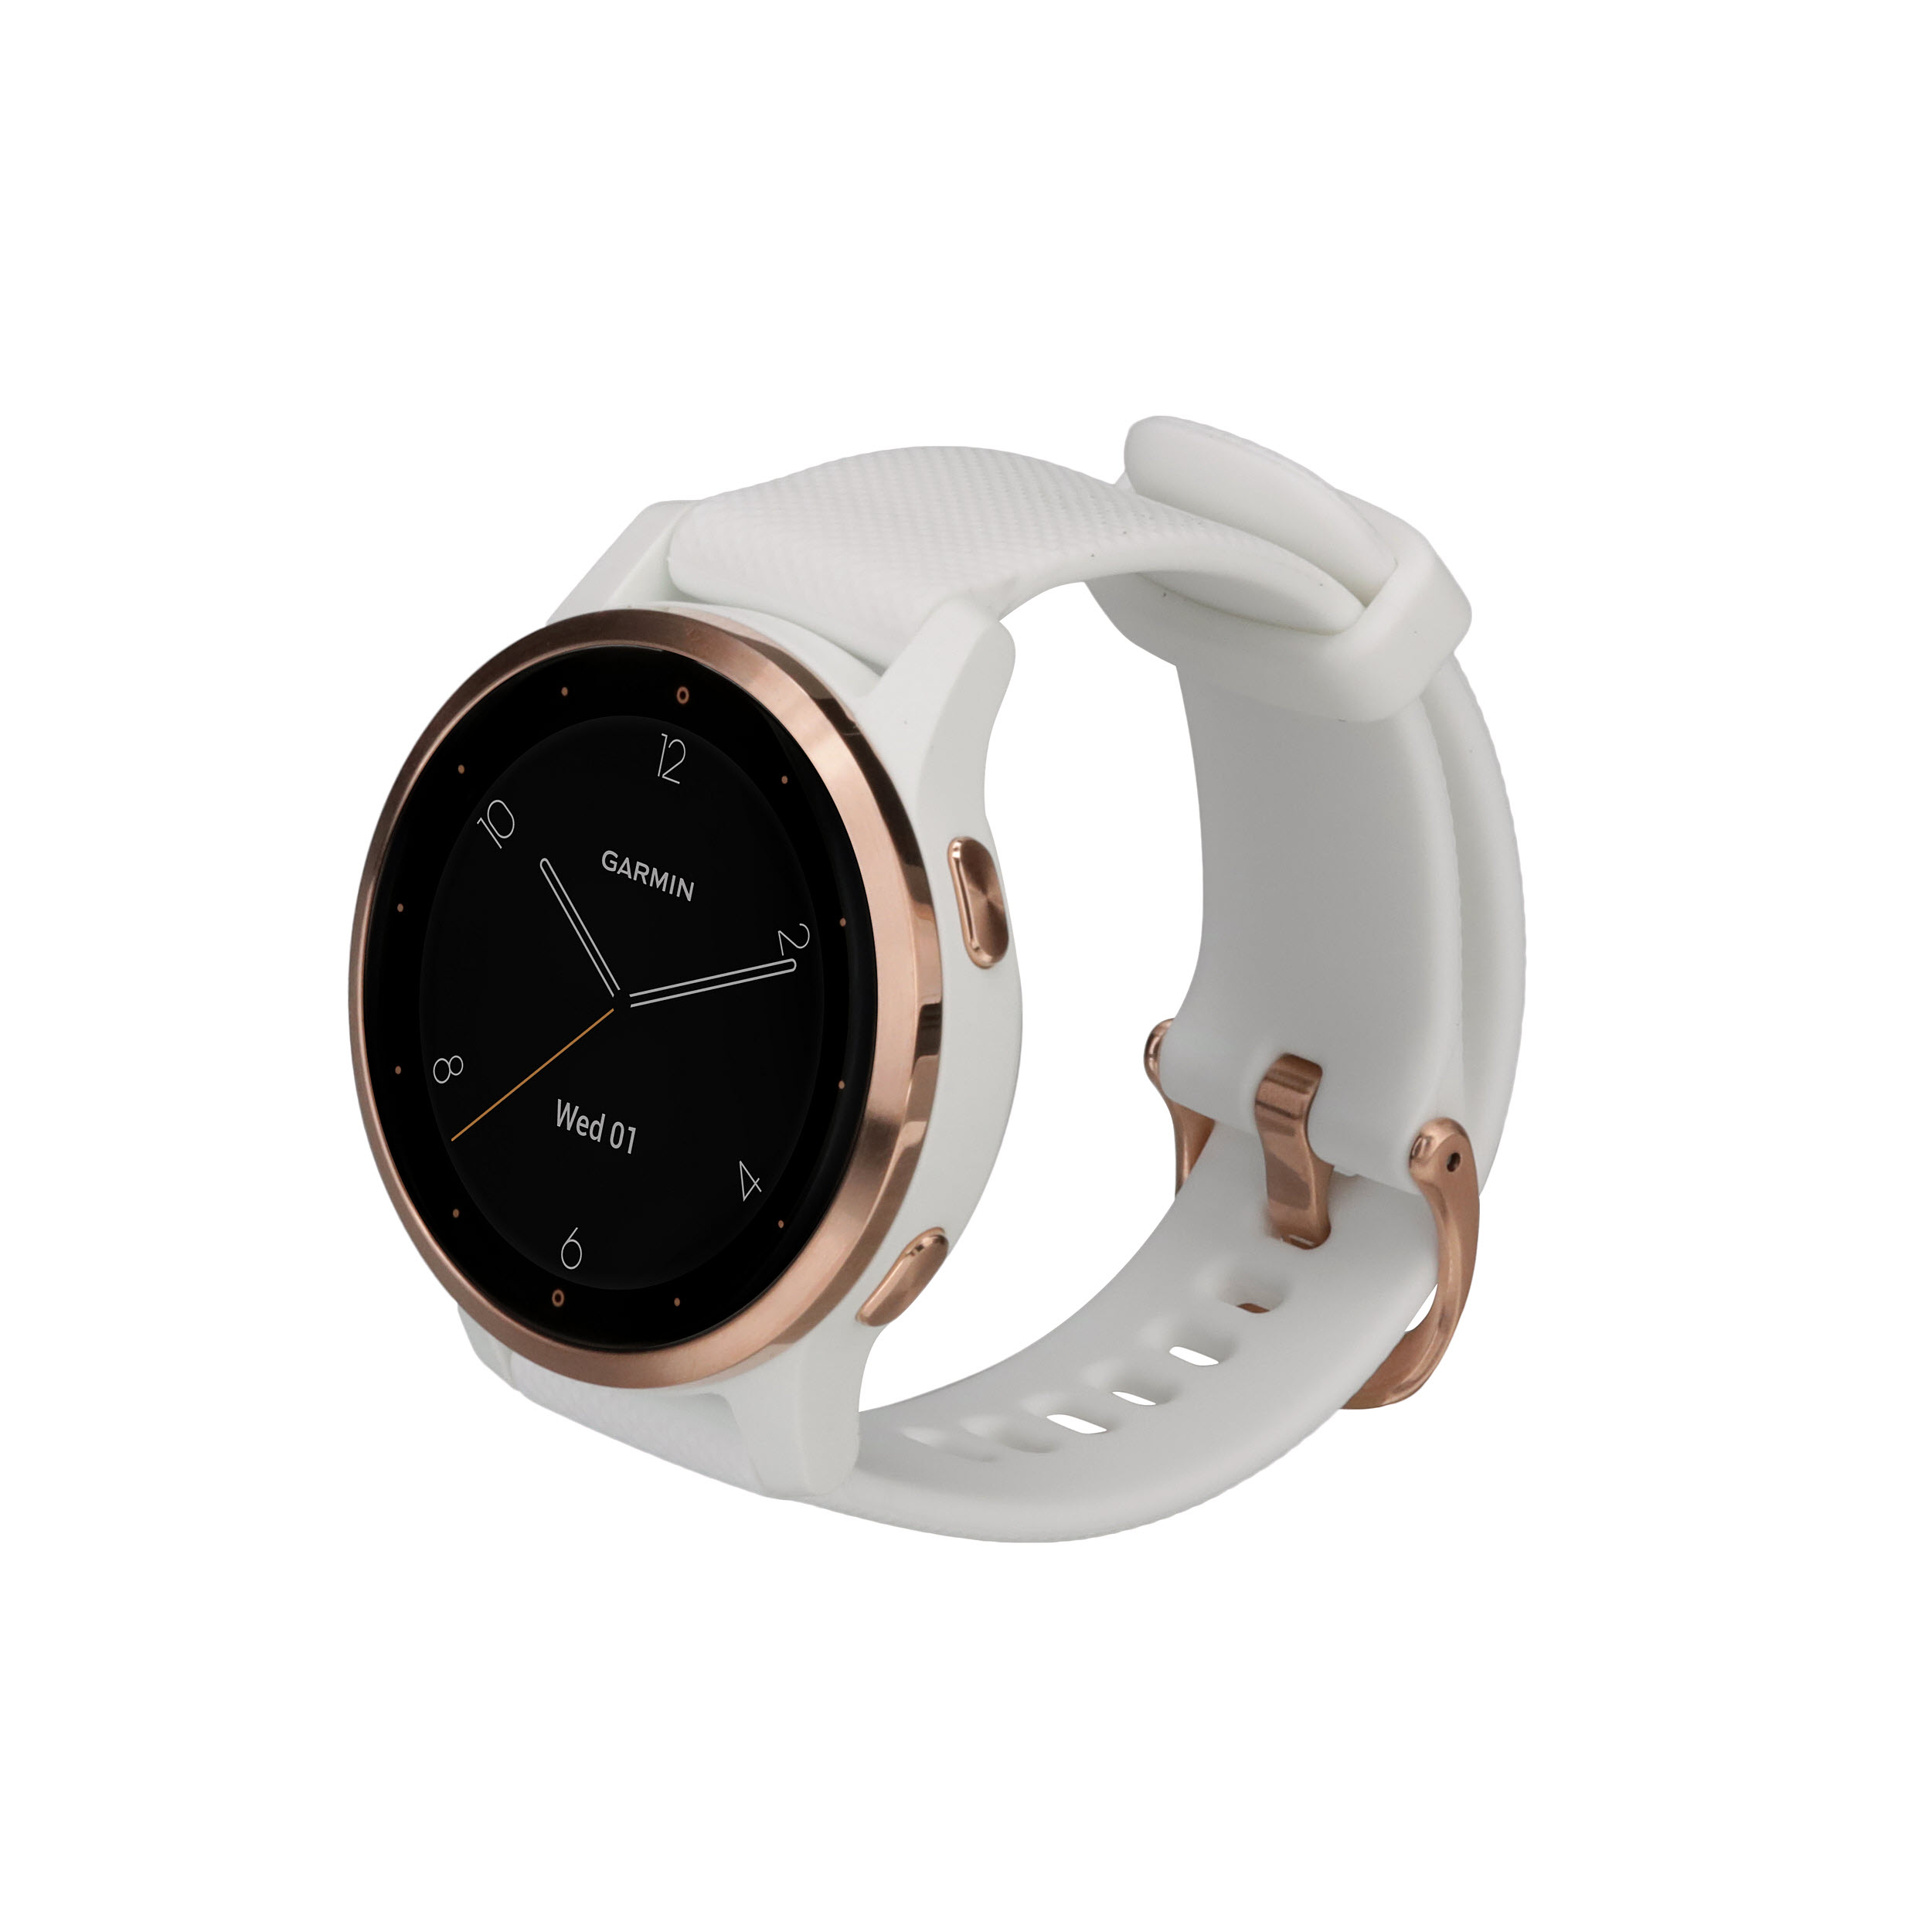 Garmin vivoactive 4S, Smaller-Sized GPS Smartwatch, Features Music, Body  Energy Monitoring, Animated Workouts, Pulse Ox Sensors, Rose Gold with  White